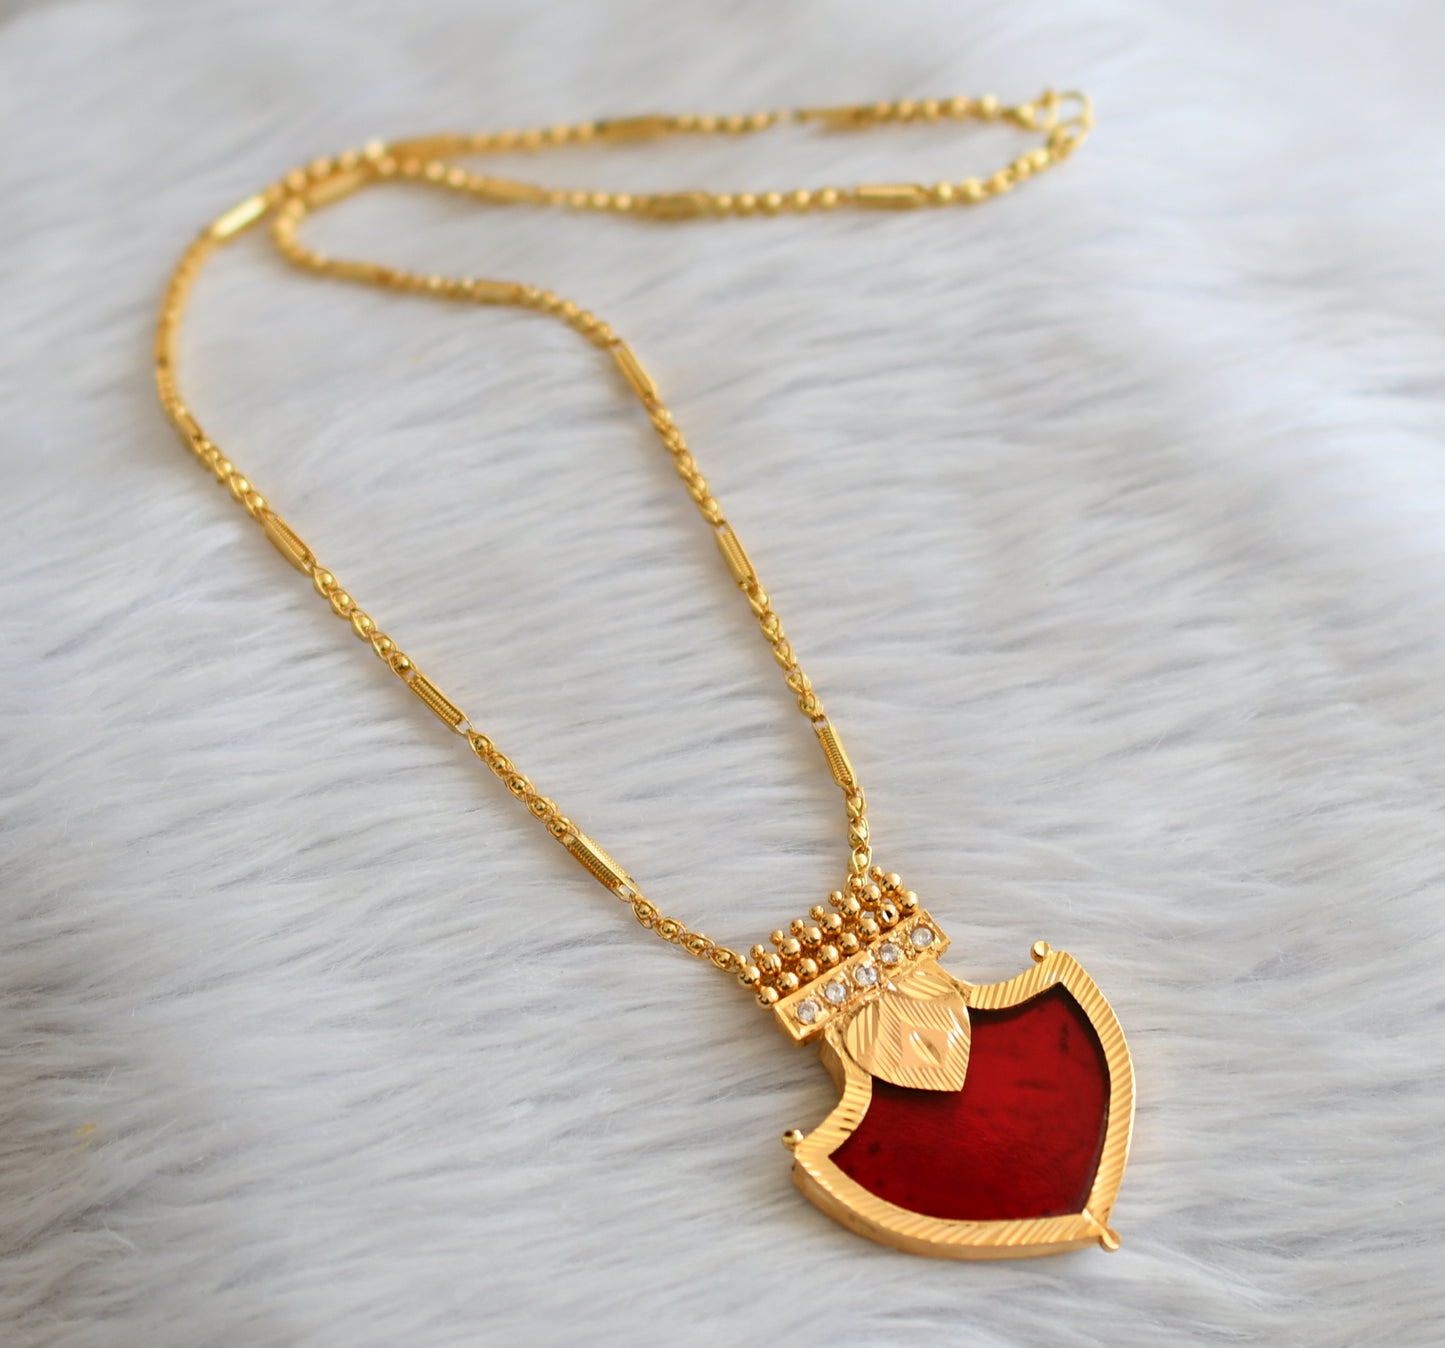 Gold tone kerala style 24 inches chain with red-white palakka pendant dj-45959